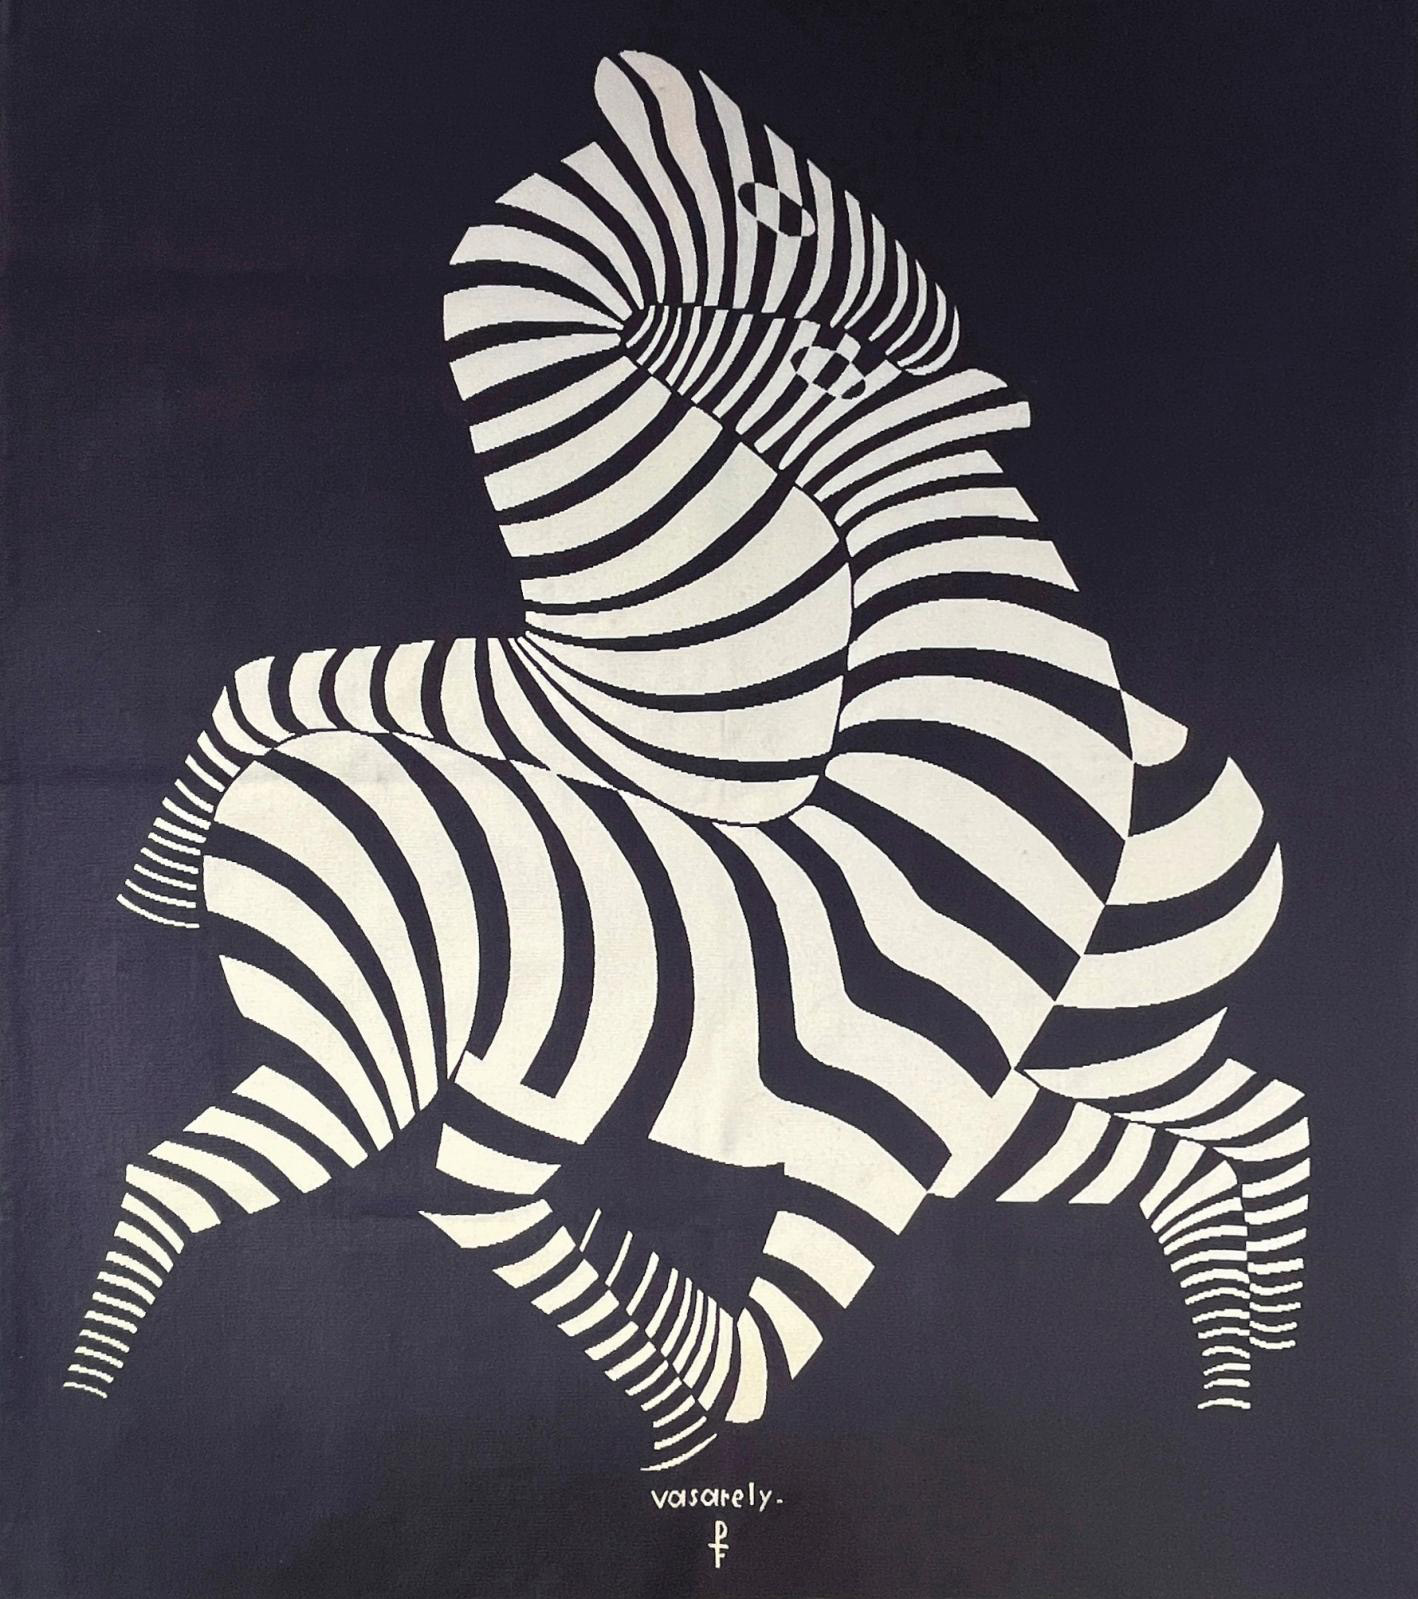 Vasarely's Zebras Woven in Aubusson 